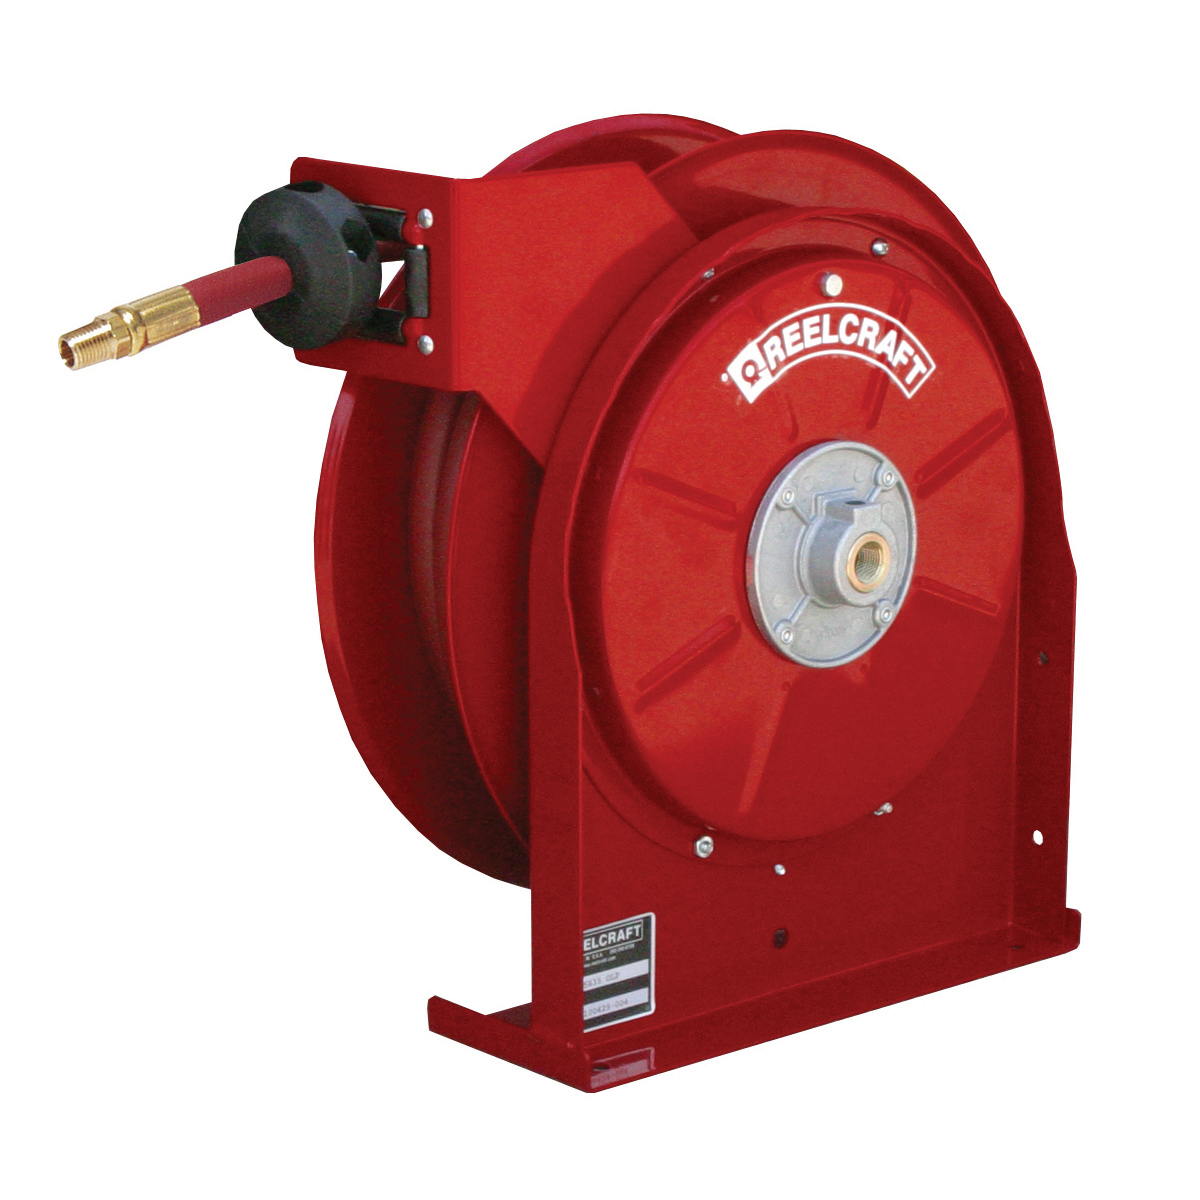 Reelcraft® 4625 OLPSW5 4000 Pre-Rinse Crafted Hose Reel With Hose, 3/8 in ID x 16/25 in OD x 25 ft L Hose, 250 psi Pressure, 12-3/8 in Dia x 2-1/2 in W Reel, Domestic